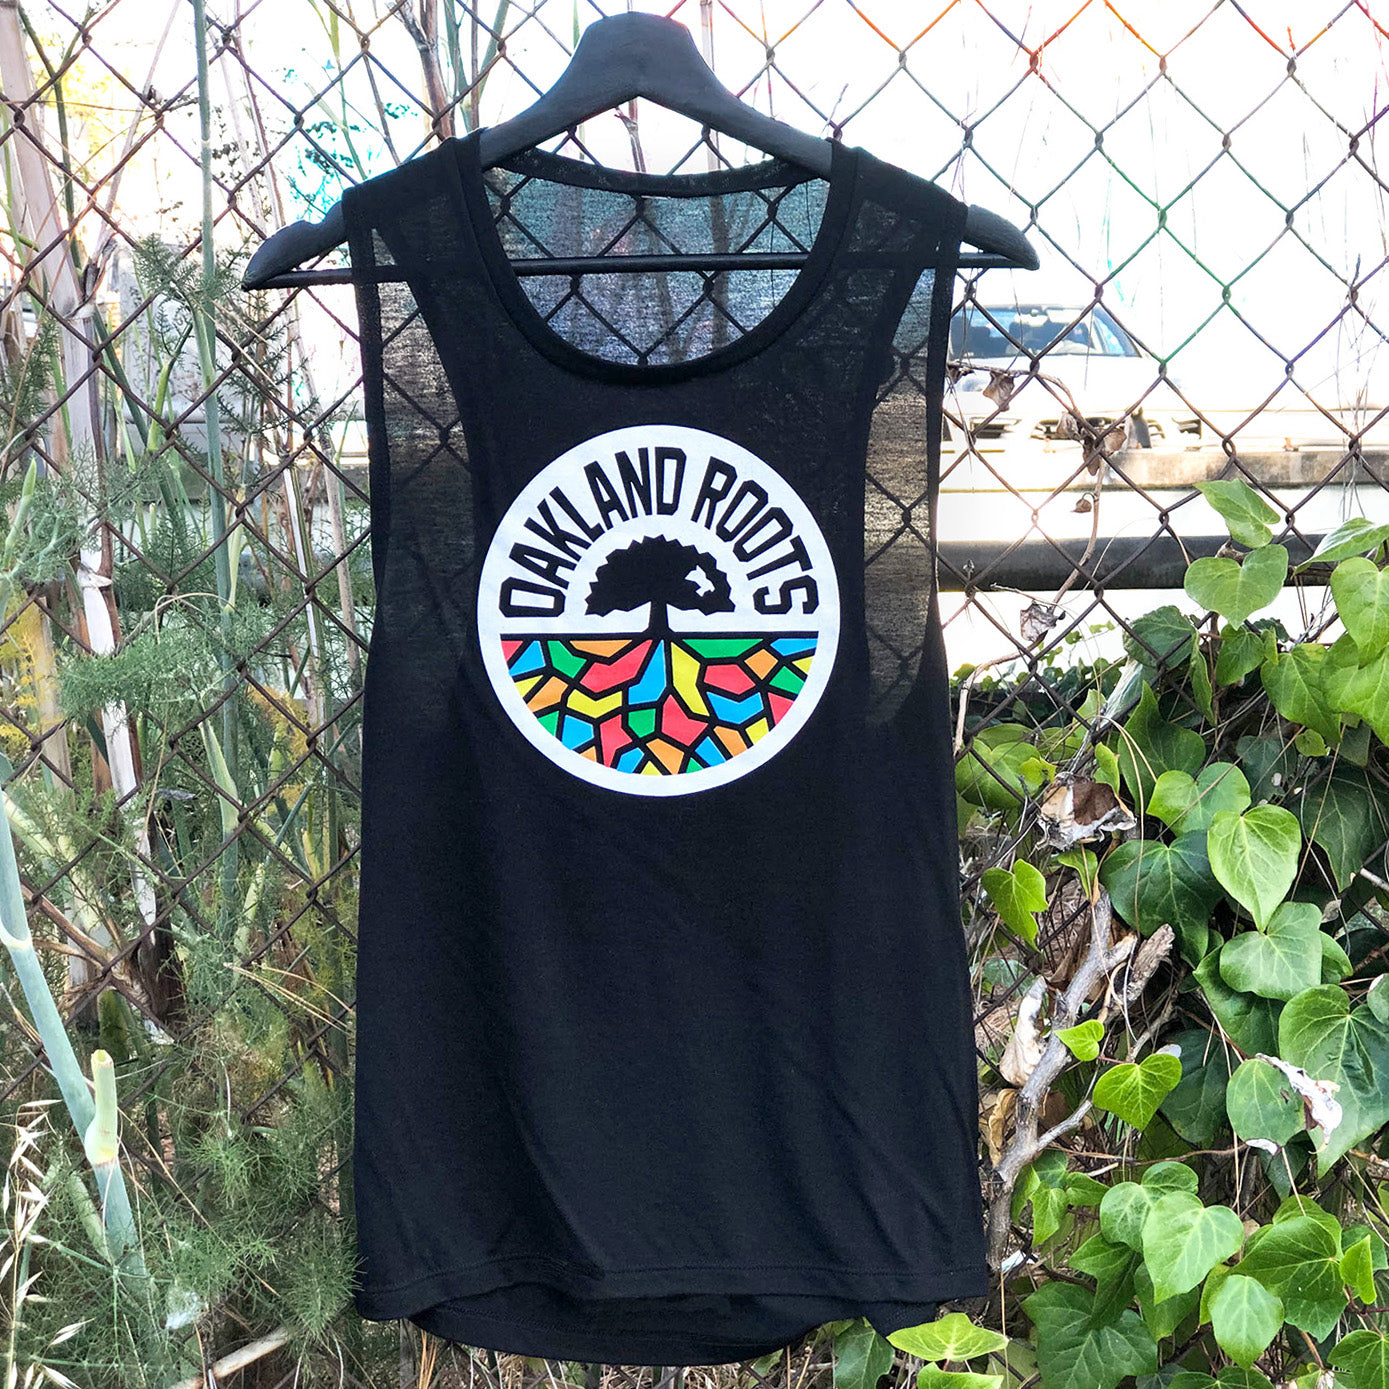 Women’s cut black tank top with full-color Oakland Roots circle logo on the chest hanging outdoors on a fence.